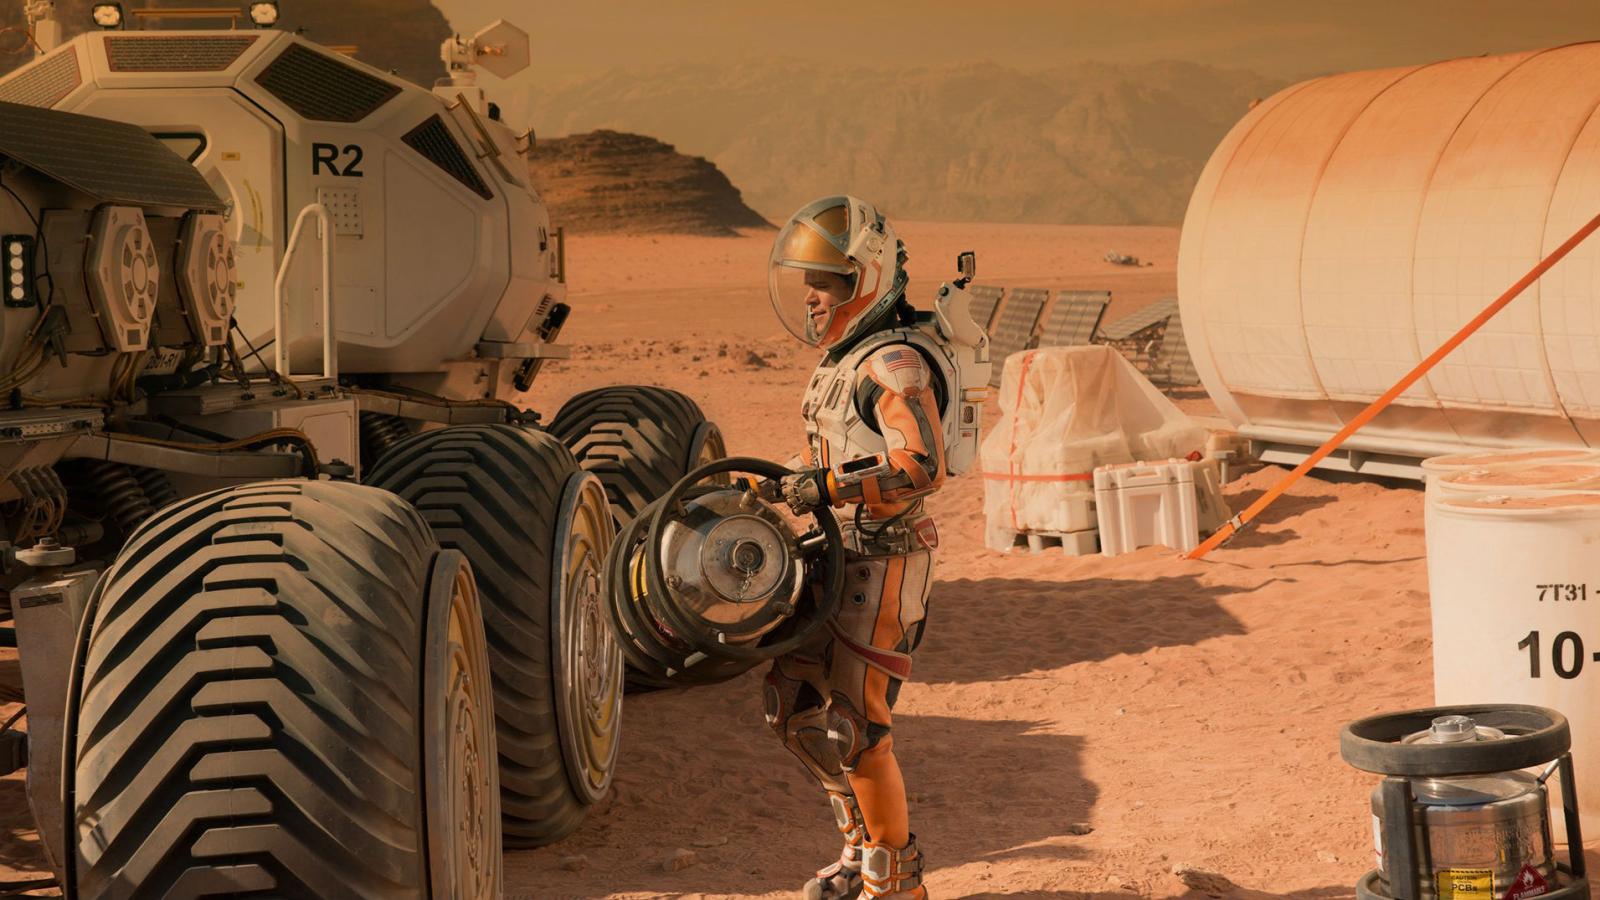 The actual NASA technologies that Matt Damon will use in the space survival film “The Martian”